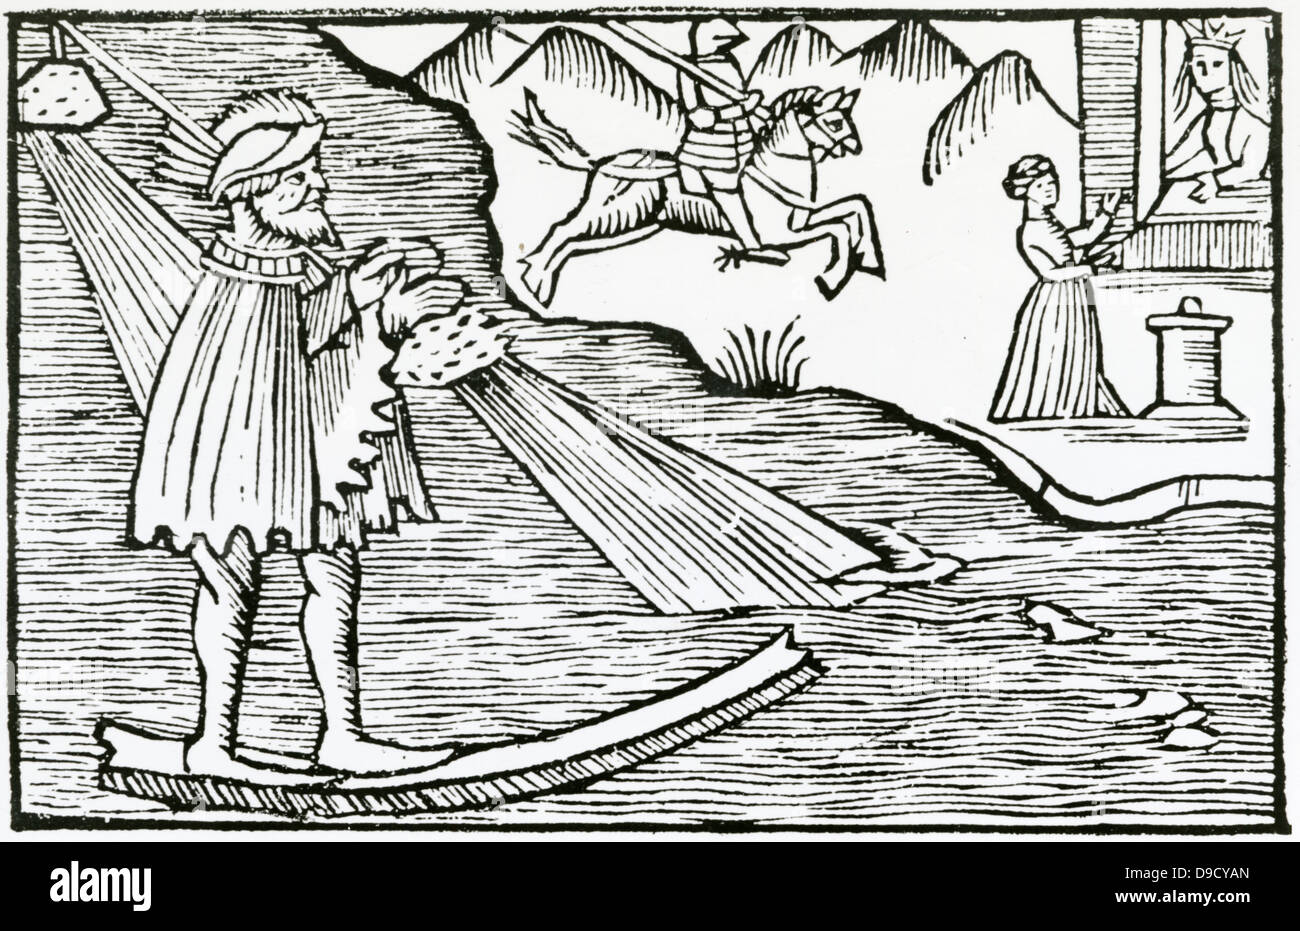 A sorcerer using his magic powers in order to walk across water.  Woodcut from Historia de gentibus septentrionalibus, Rome, 1555, by Olaus Magnus. Stock Photo